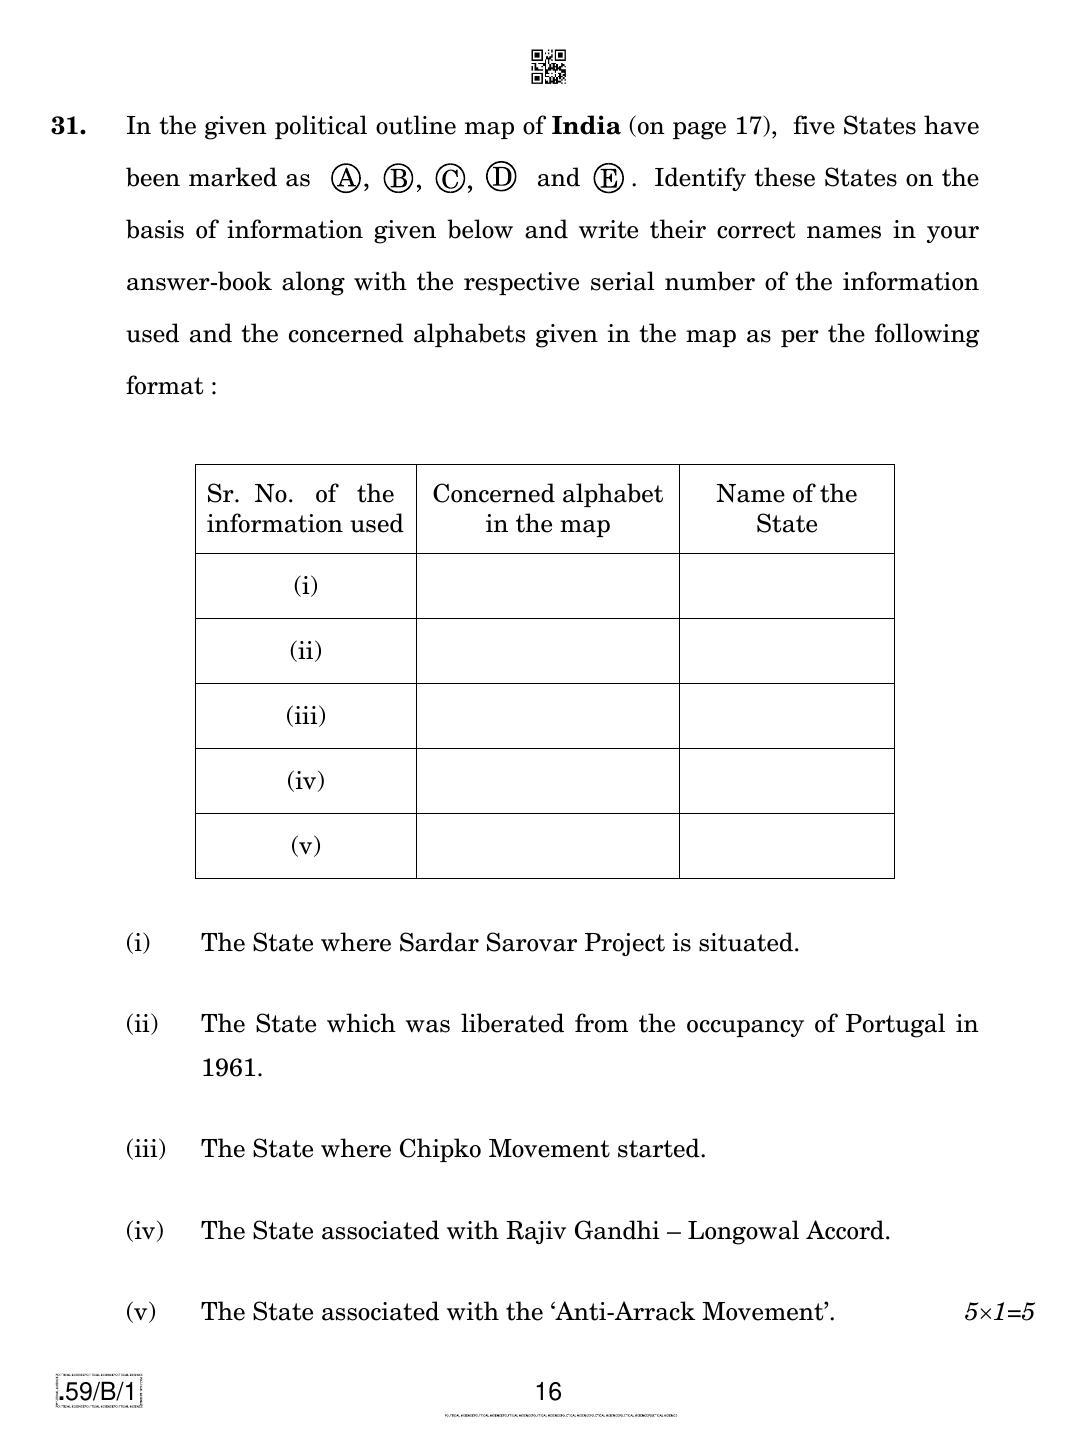 CBSE Class 12 59-C-1 - Political Science 2020 Compartment Question Paper - Page 16